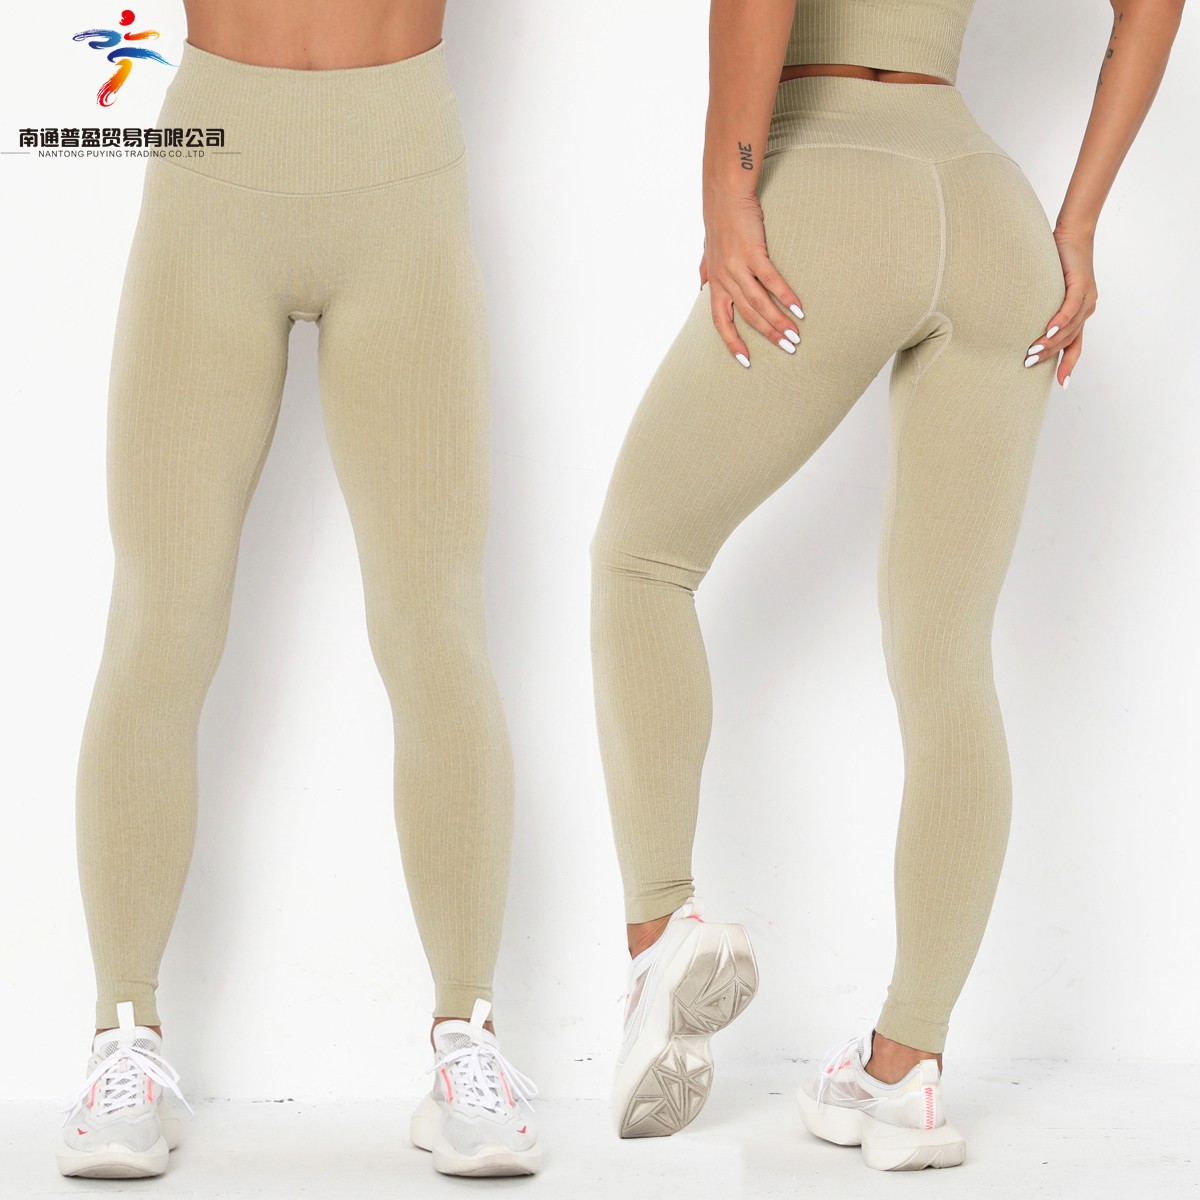 customized seamless quick dry high elastic Gym fitness leggings